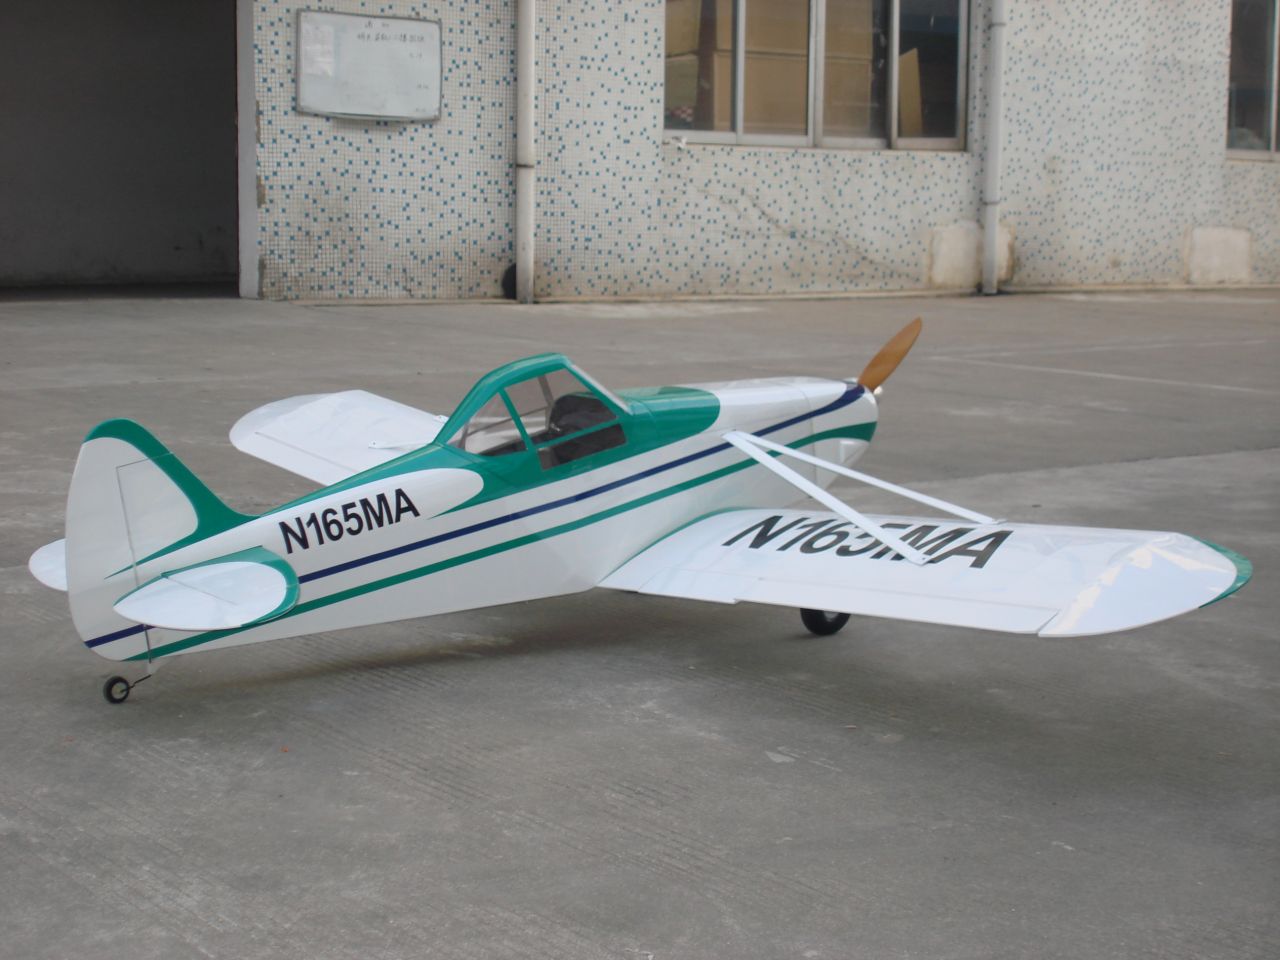 piper%20pawnee%20low%20wing%20agricultural%20wooden%20construction%20model%20plane%20for%2026-35cc